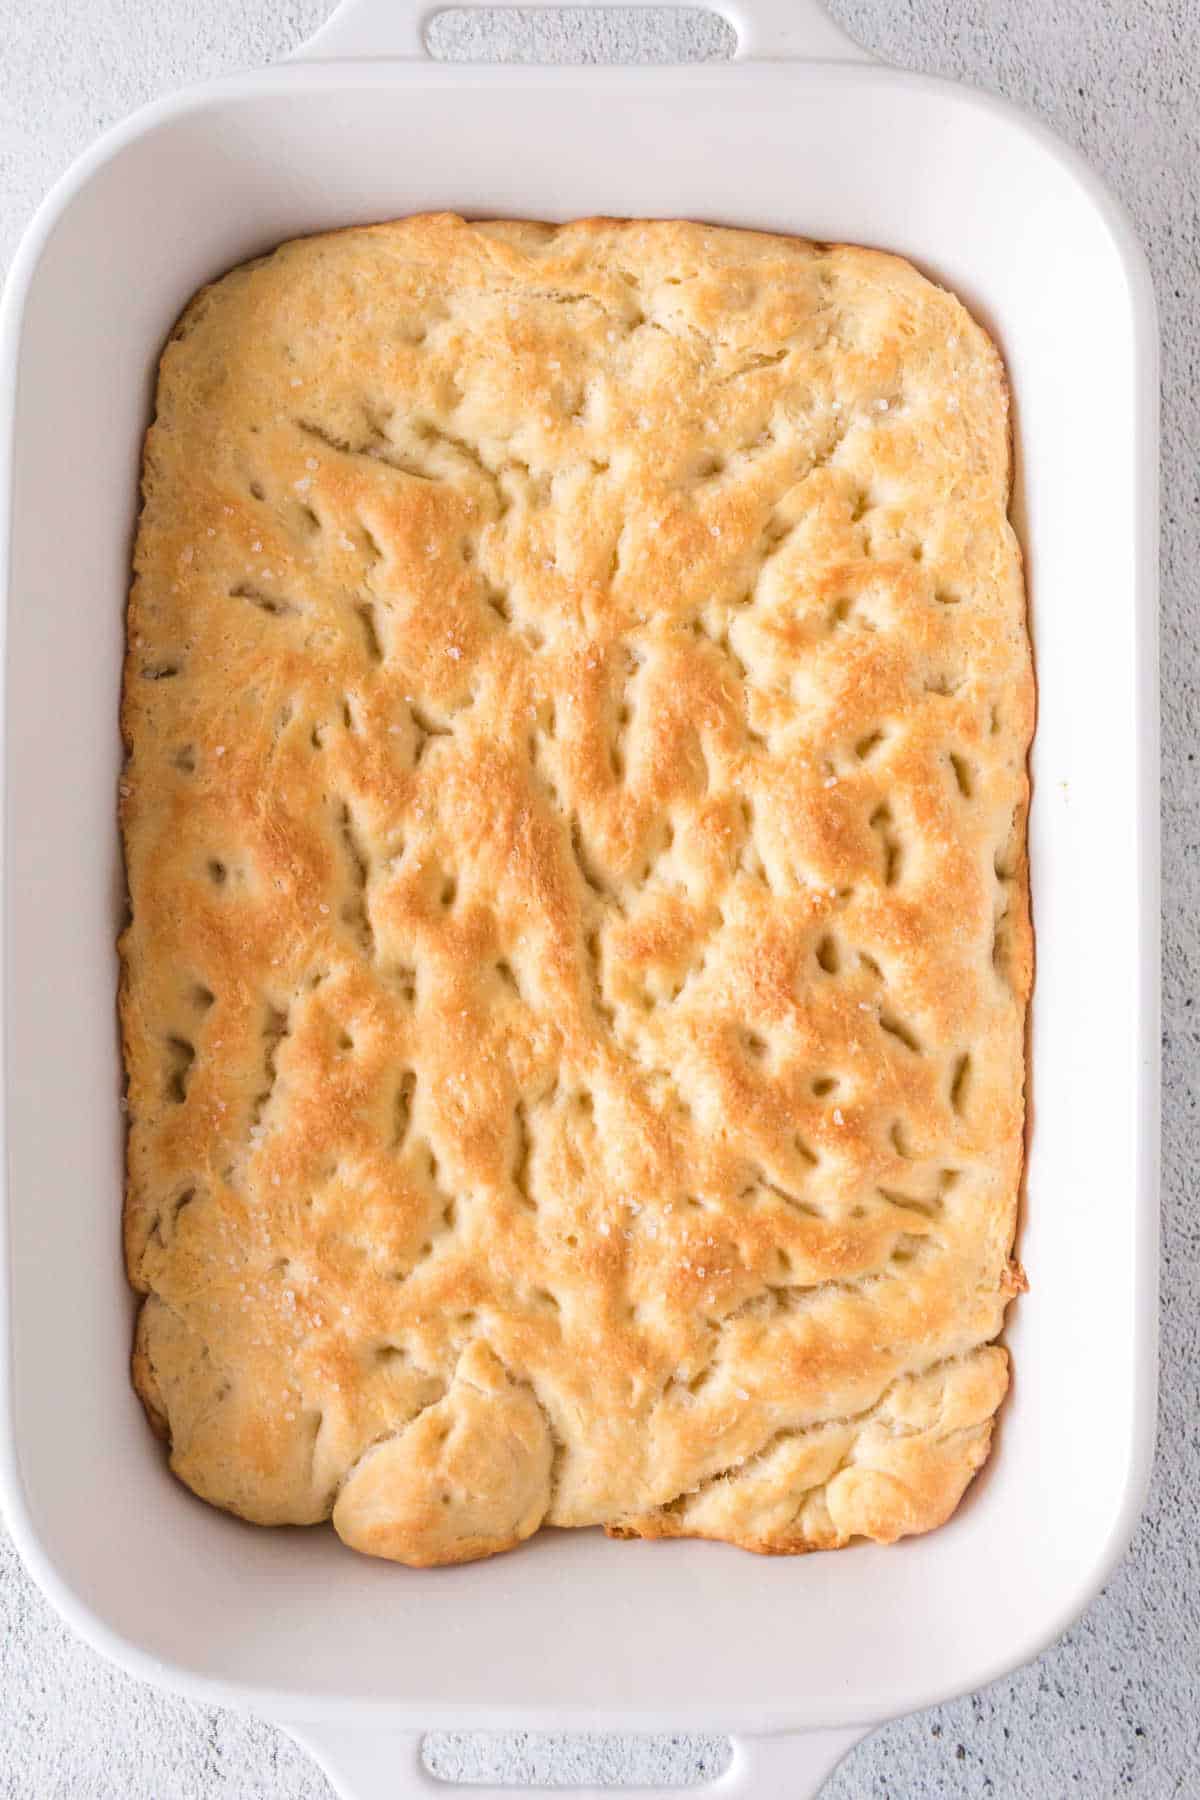 Overhead view of baked focaccia in a casserole dish.